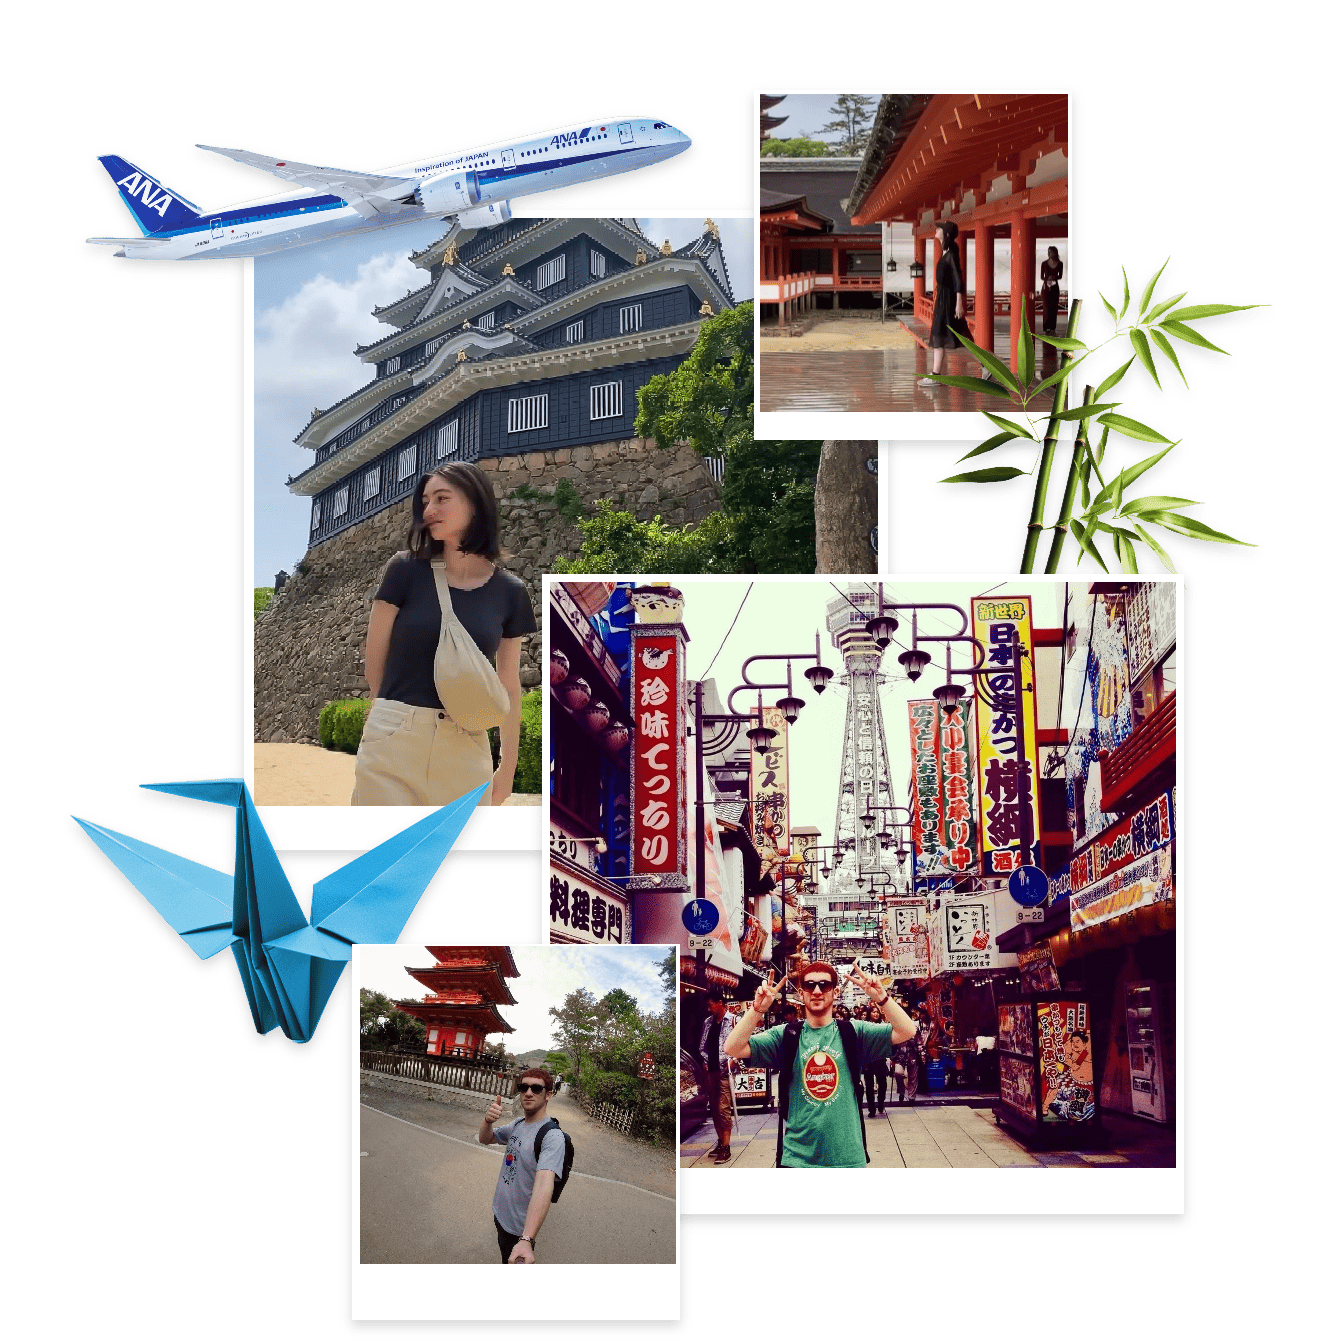 Collage of travel photos in Japan, featuring an ANA airplane, Matsumoto Castle, a woman at a shrine, origami crane, bustling street scene with a man holding up peace signs, and torii gate with a man posing with his thumbs up. 